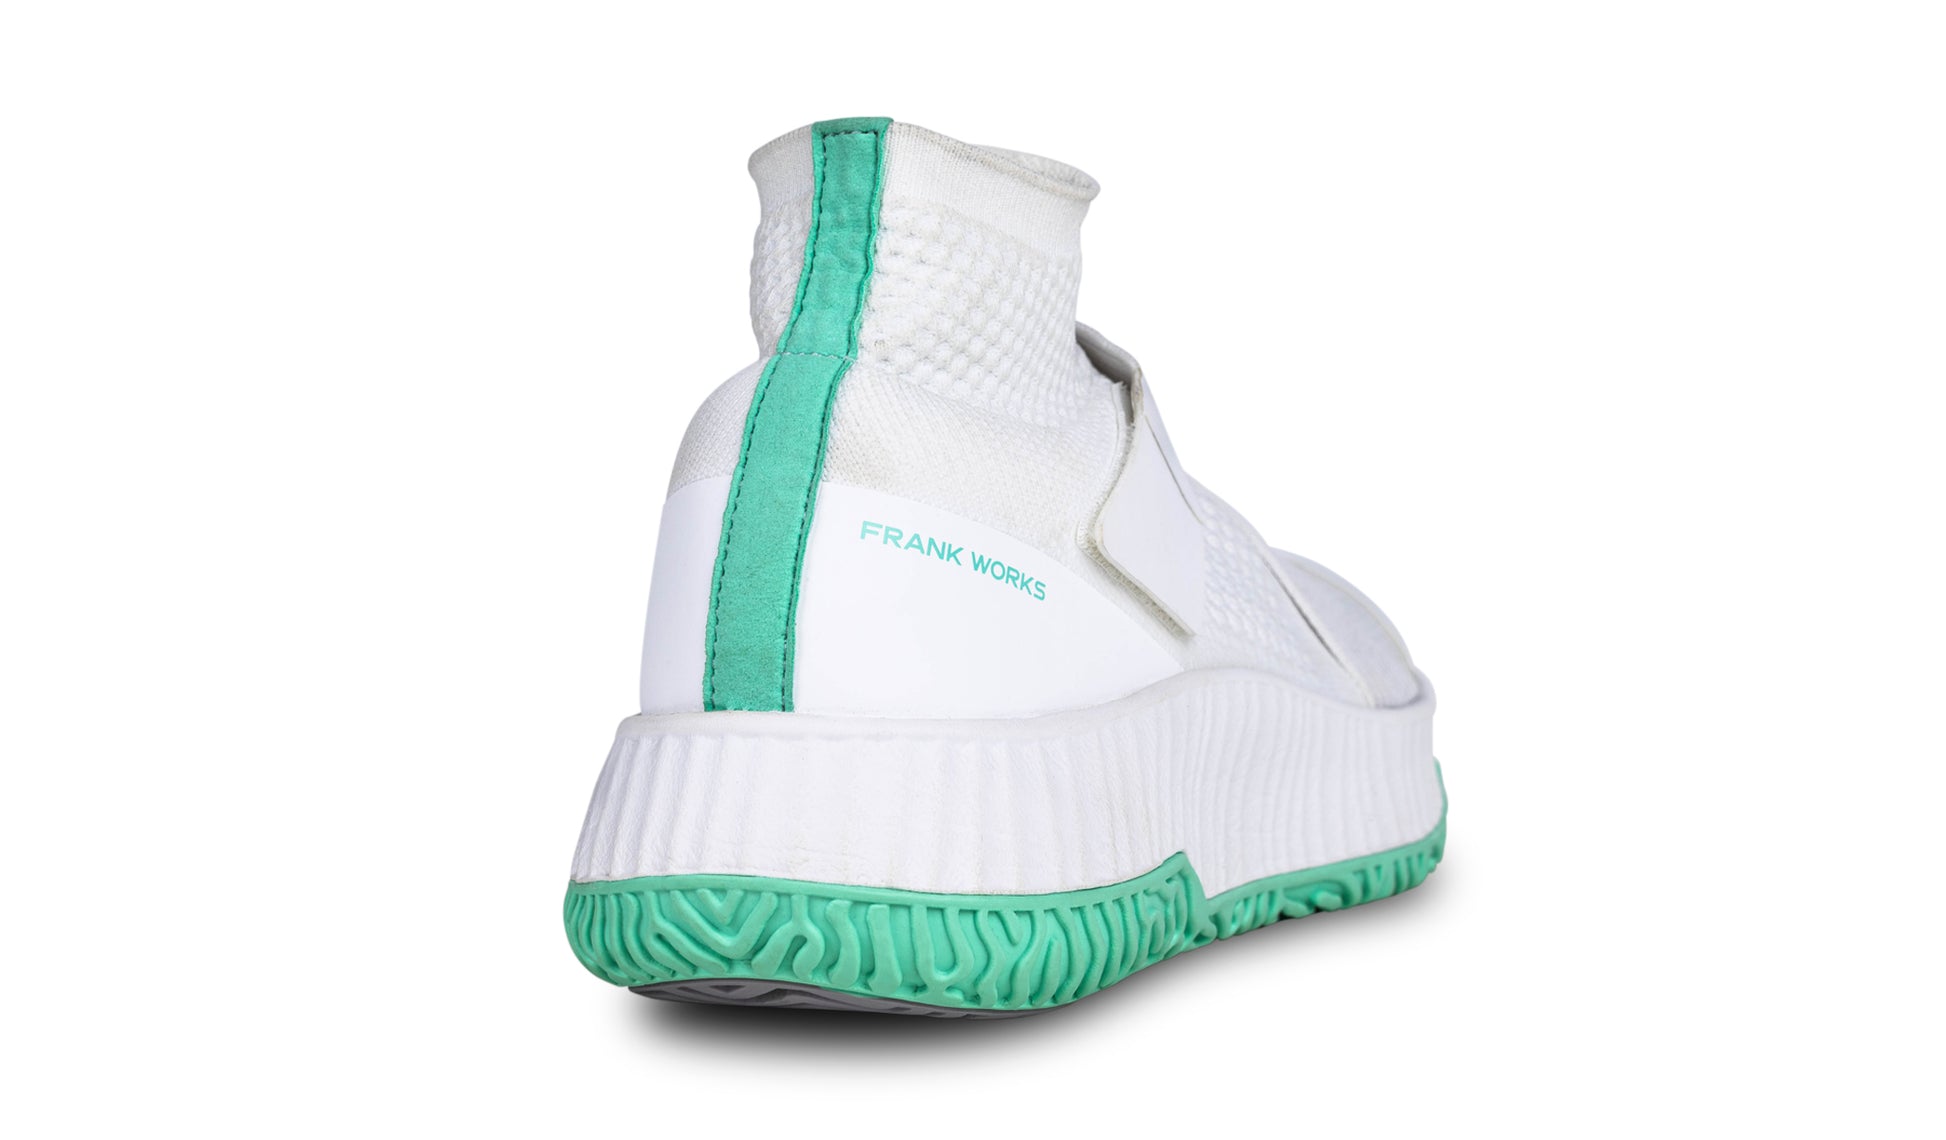 Serious player Only Player 1 hater colorway